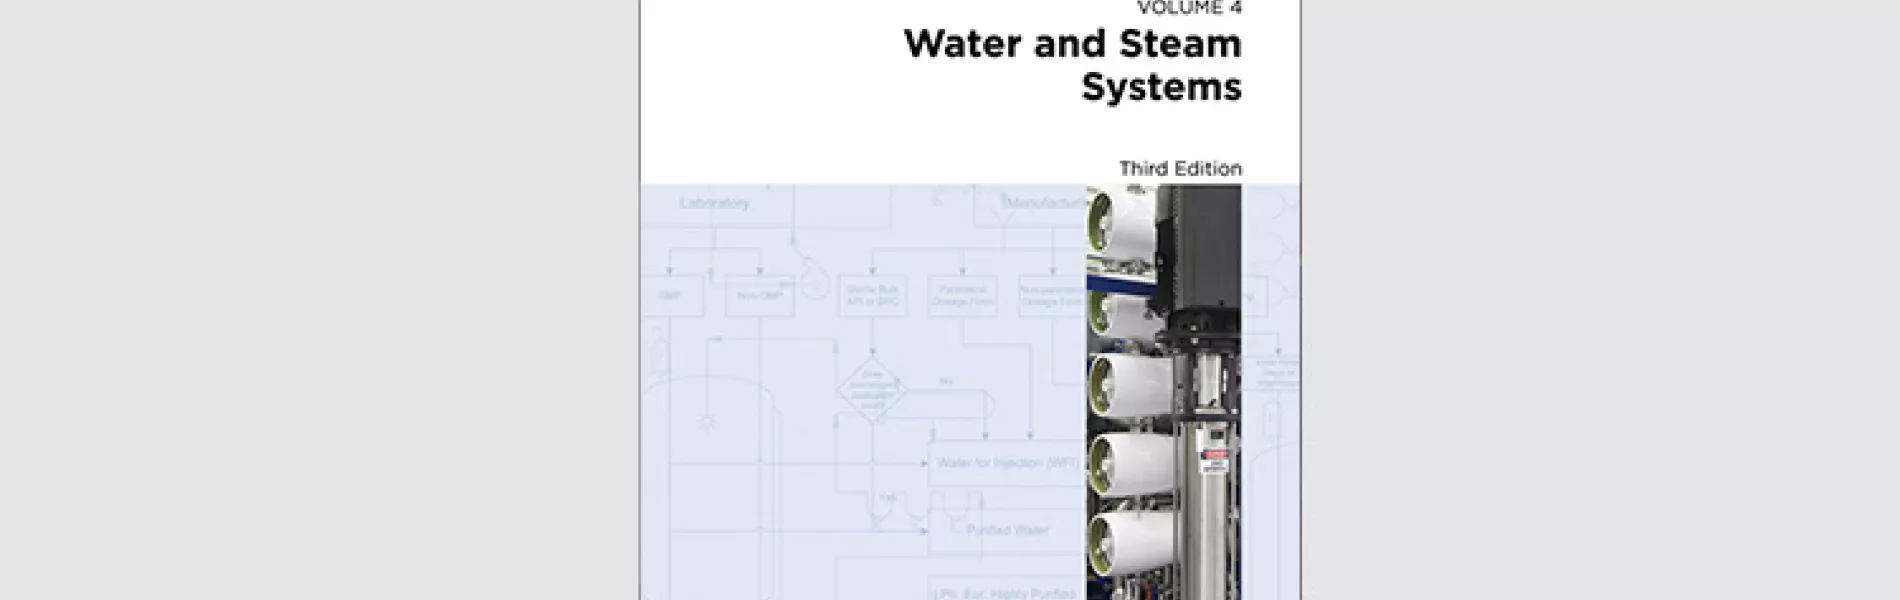 Baseline Guide Vol 4: Water & Steam Systems 3rd Edition